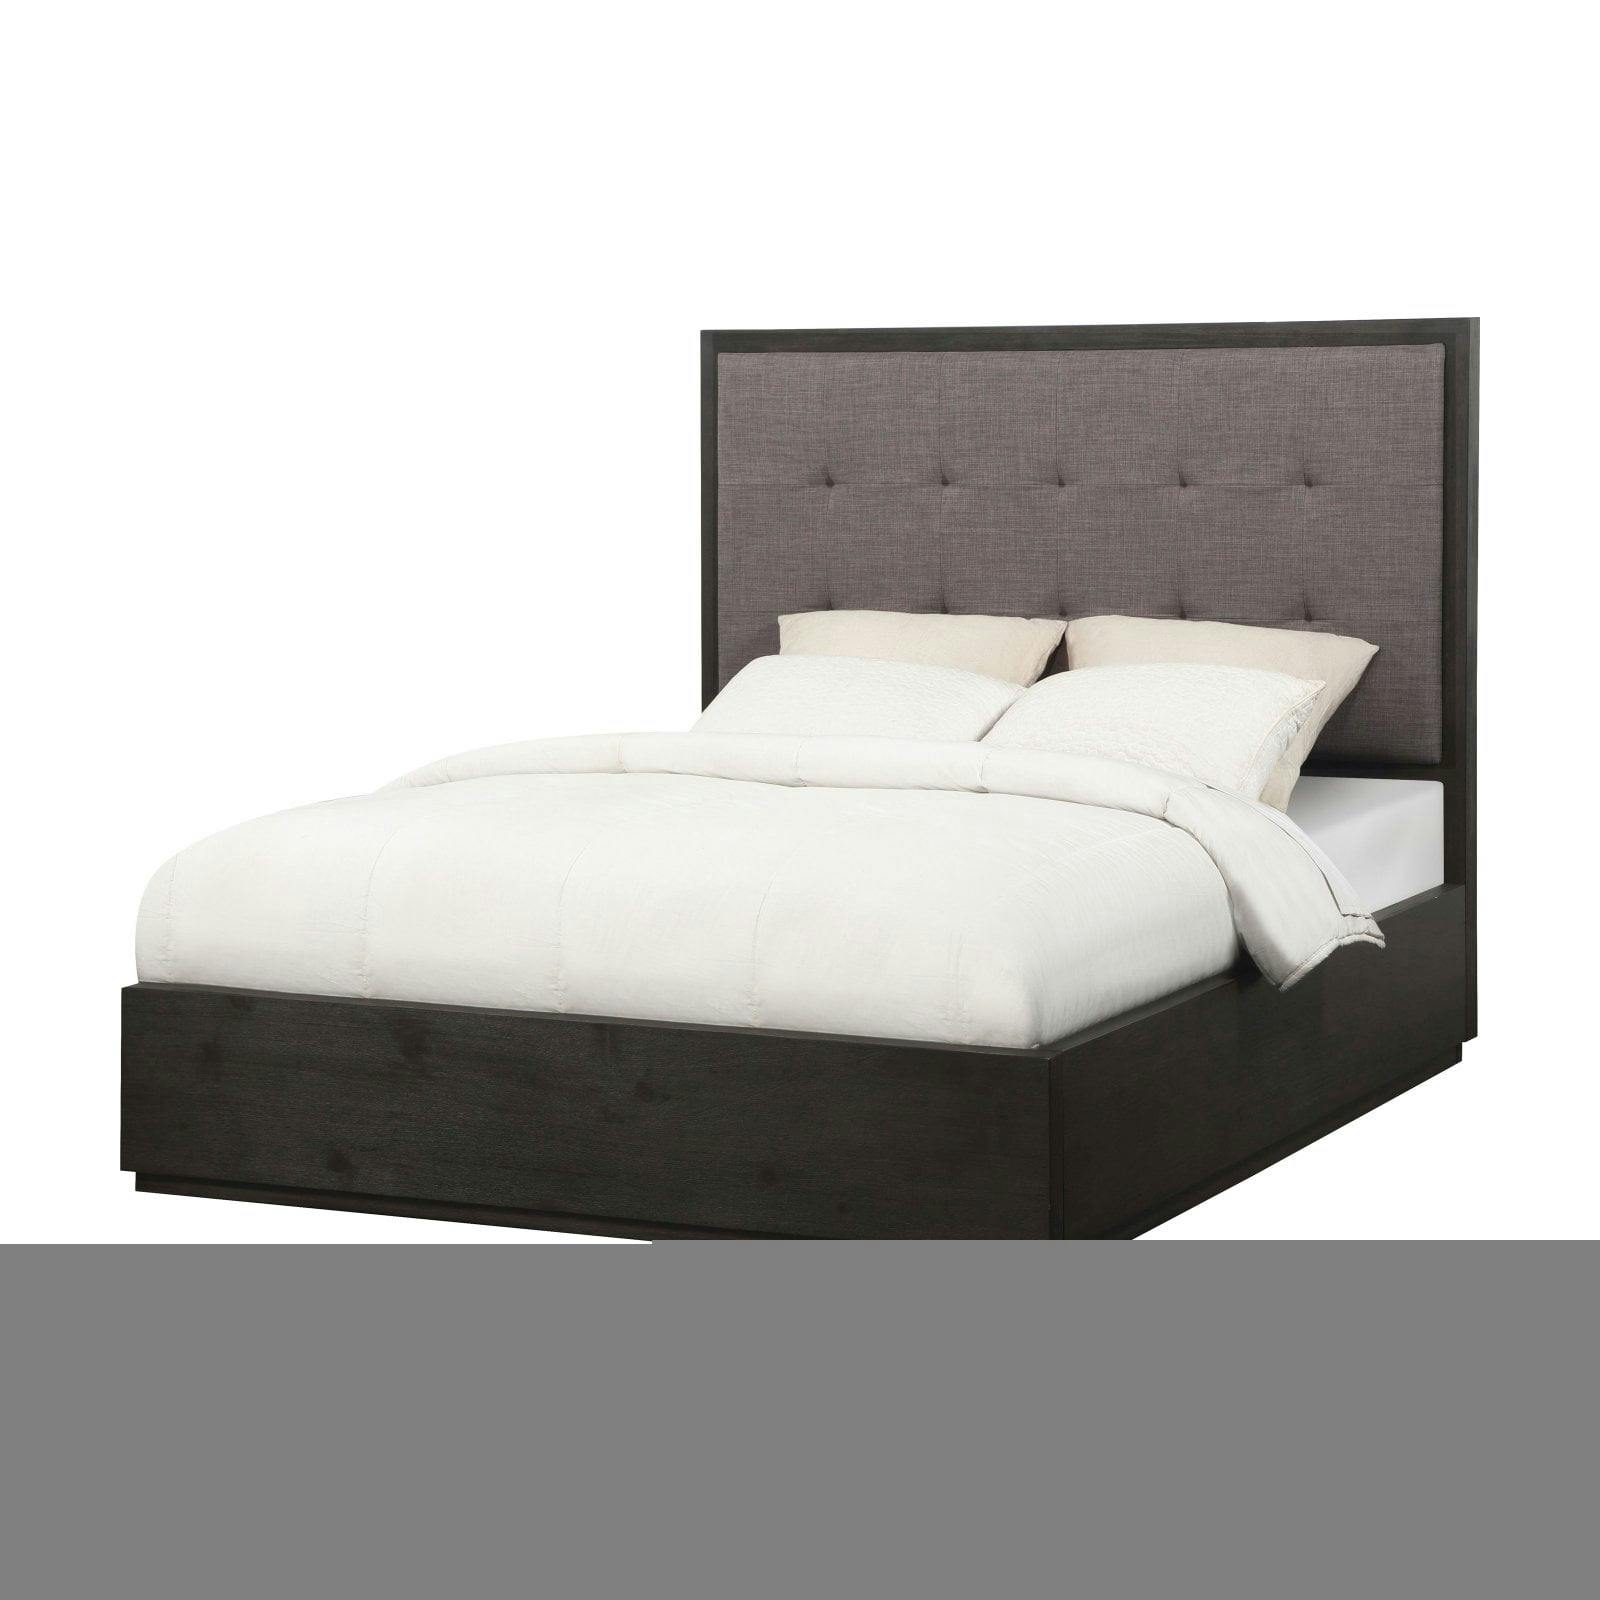 Basalt Gray and Dolphin King Upholstered Platform Bed with Nickel Accents